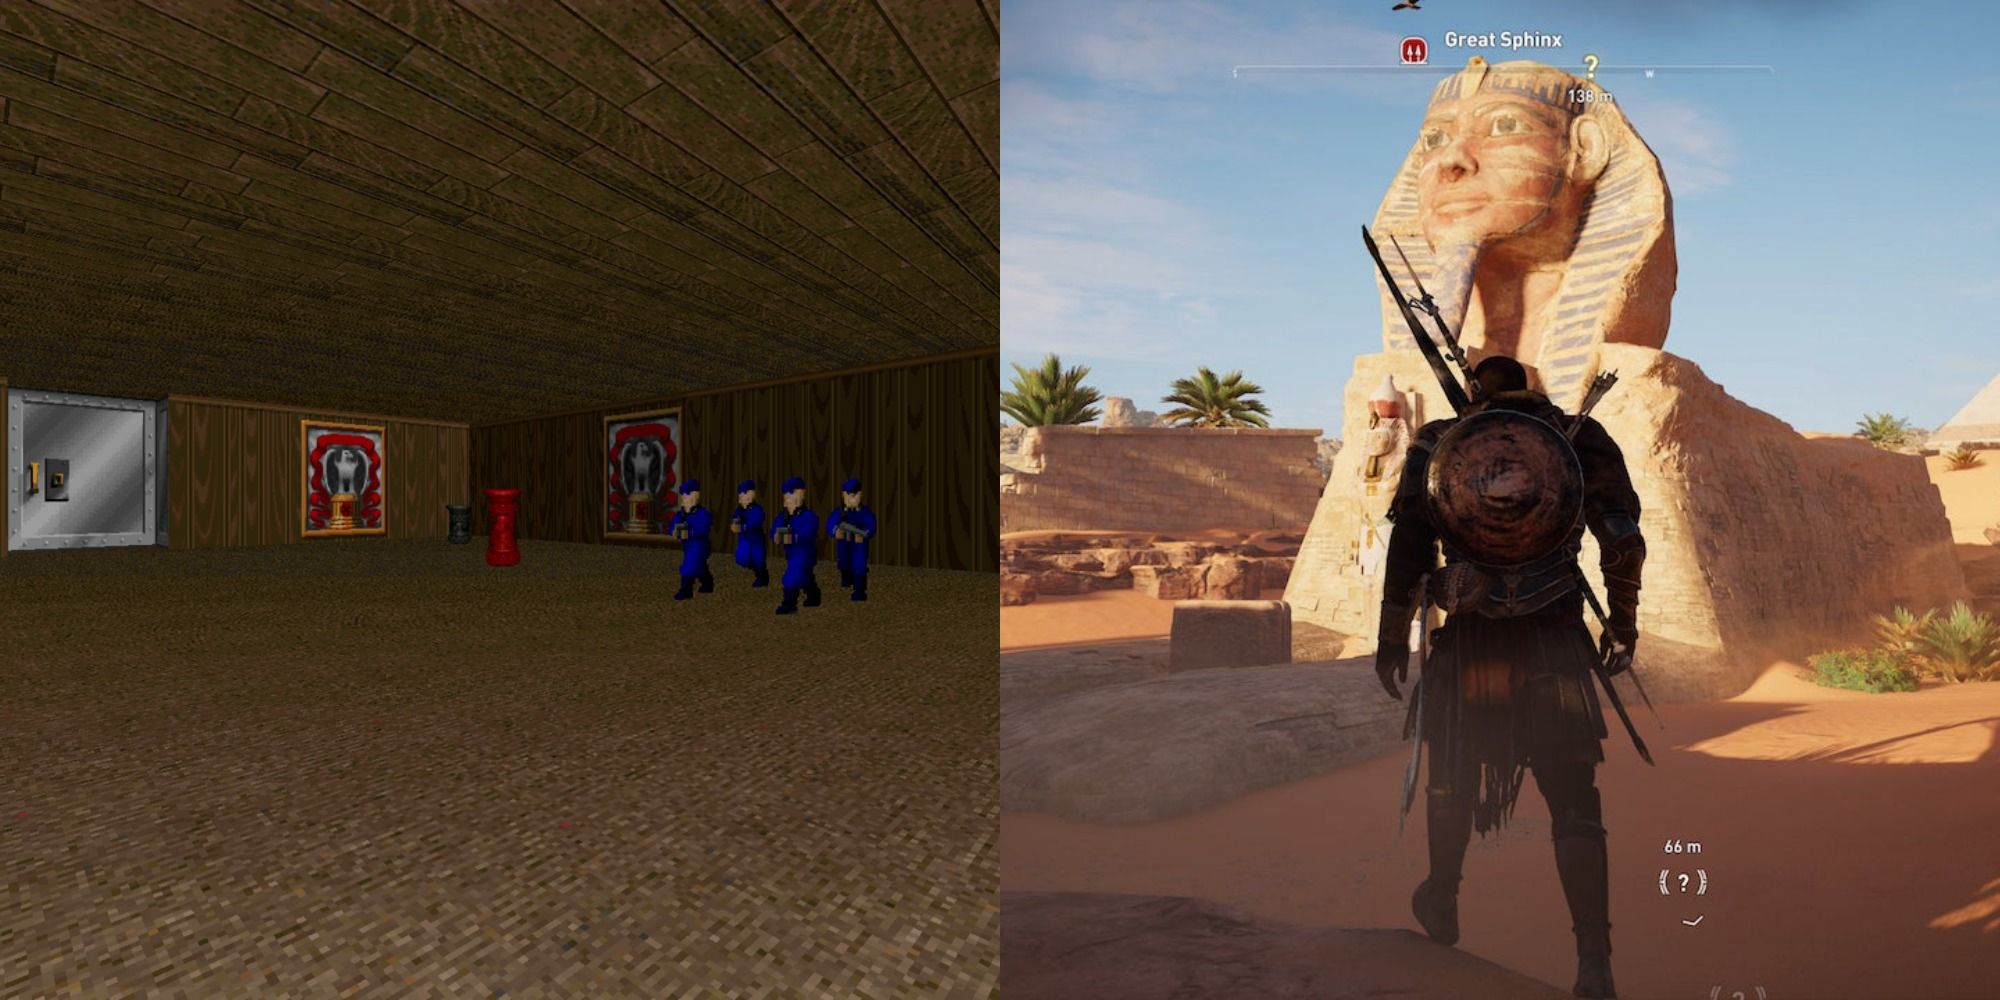 Split image showing the Wolfenstein-inspired secret room in Doom II, and the player character in front of the Sphinx in AC: Origins